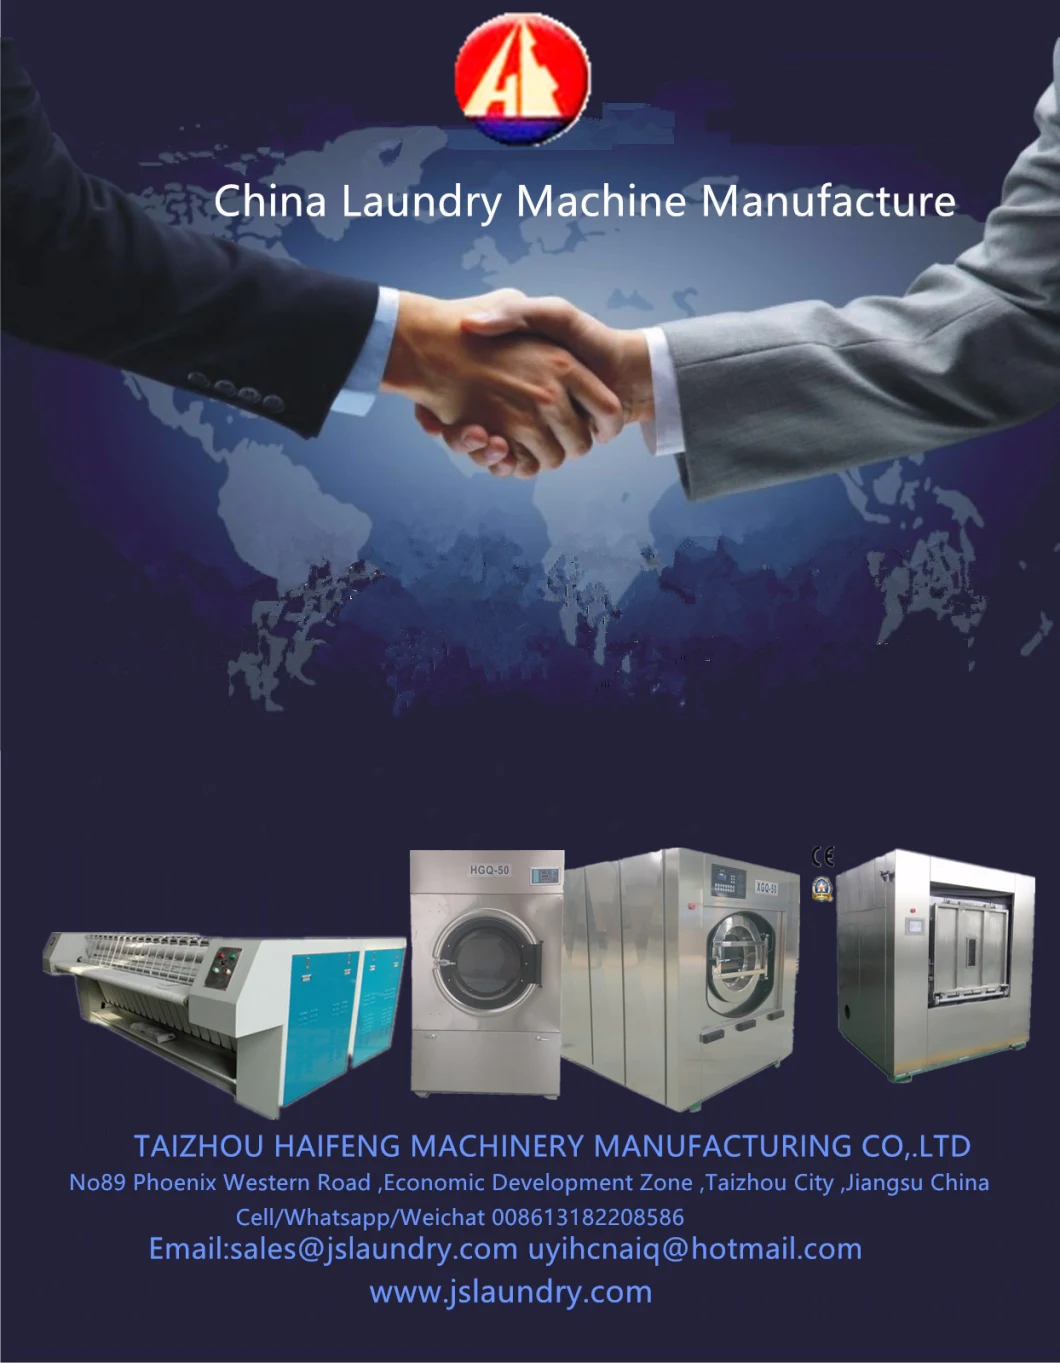 Industrial /Perklone/Laundry/Commercial Dry Cleaning Equipment /Dry Cleaner Machine Price for Sale